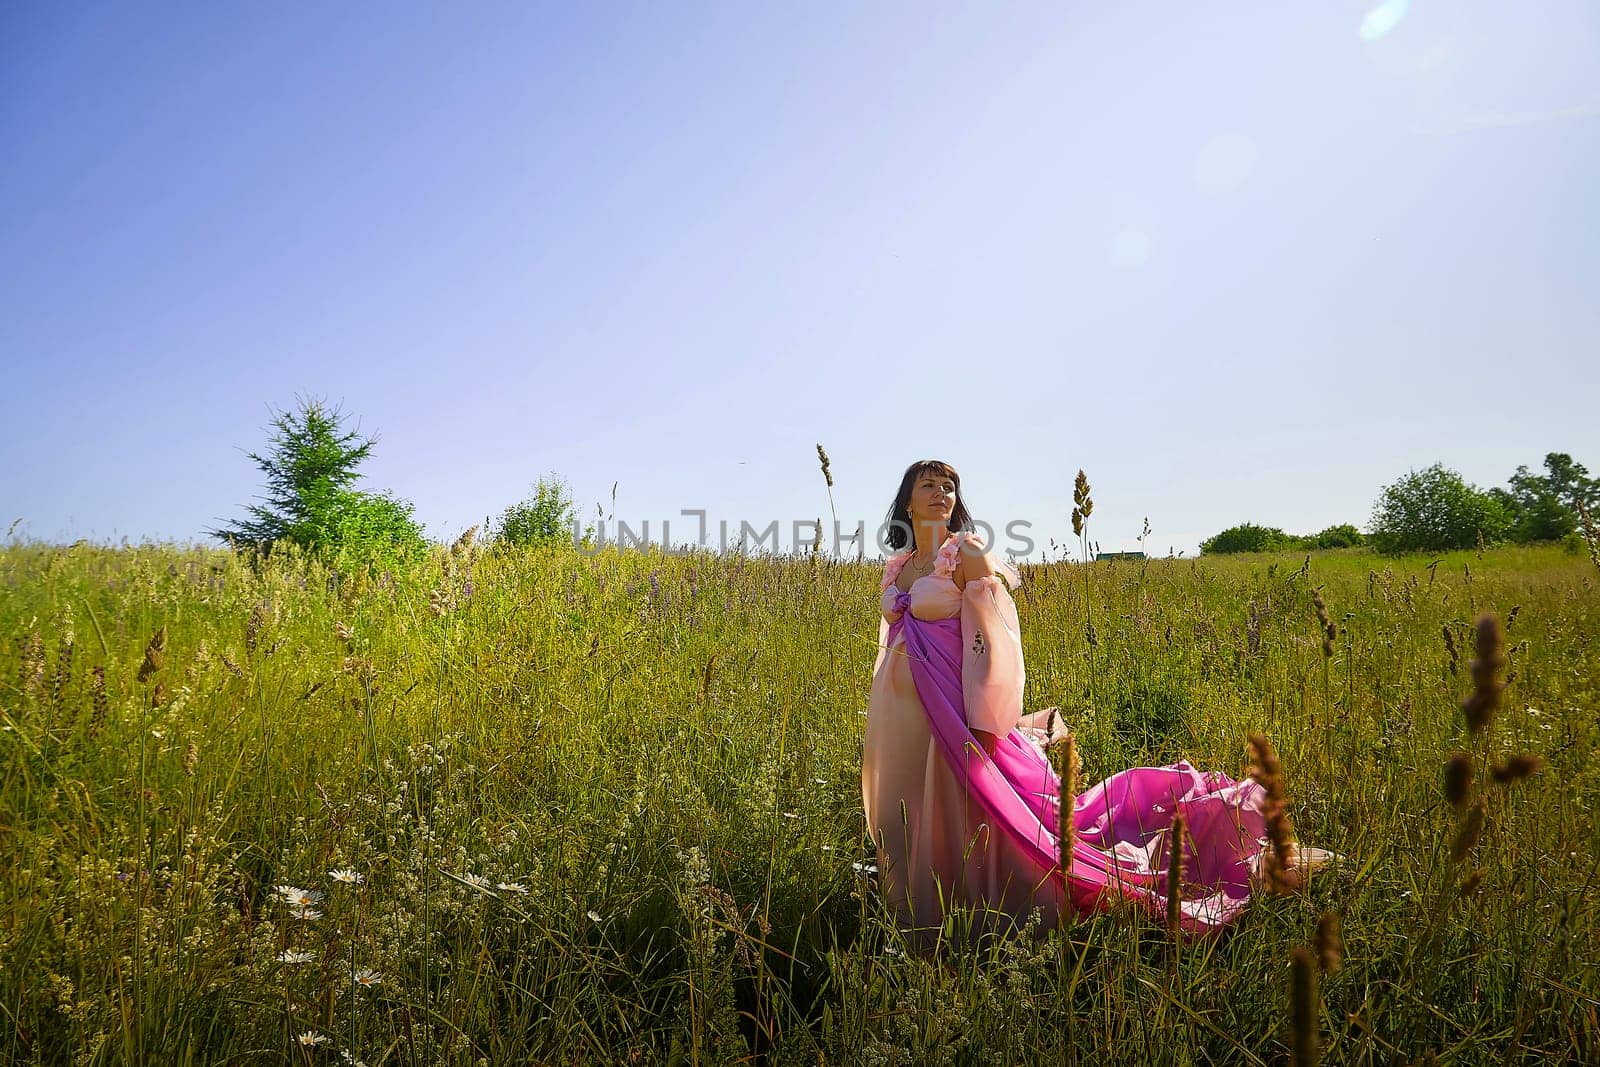 Beautiful girl in a lush pink ball gown in green field during blooming of flowers and blue sky on background. Model posing on nature landscape as princess from fary tale by keleny